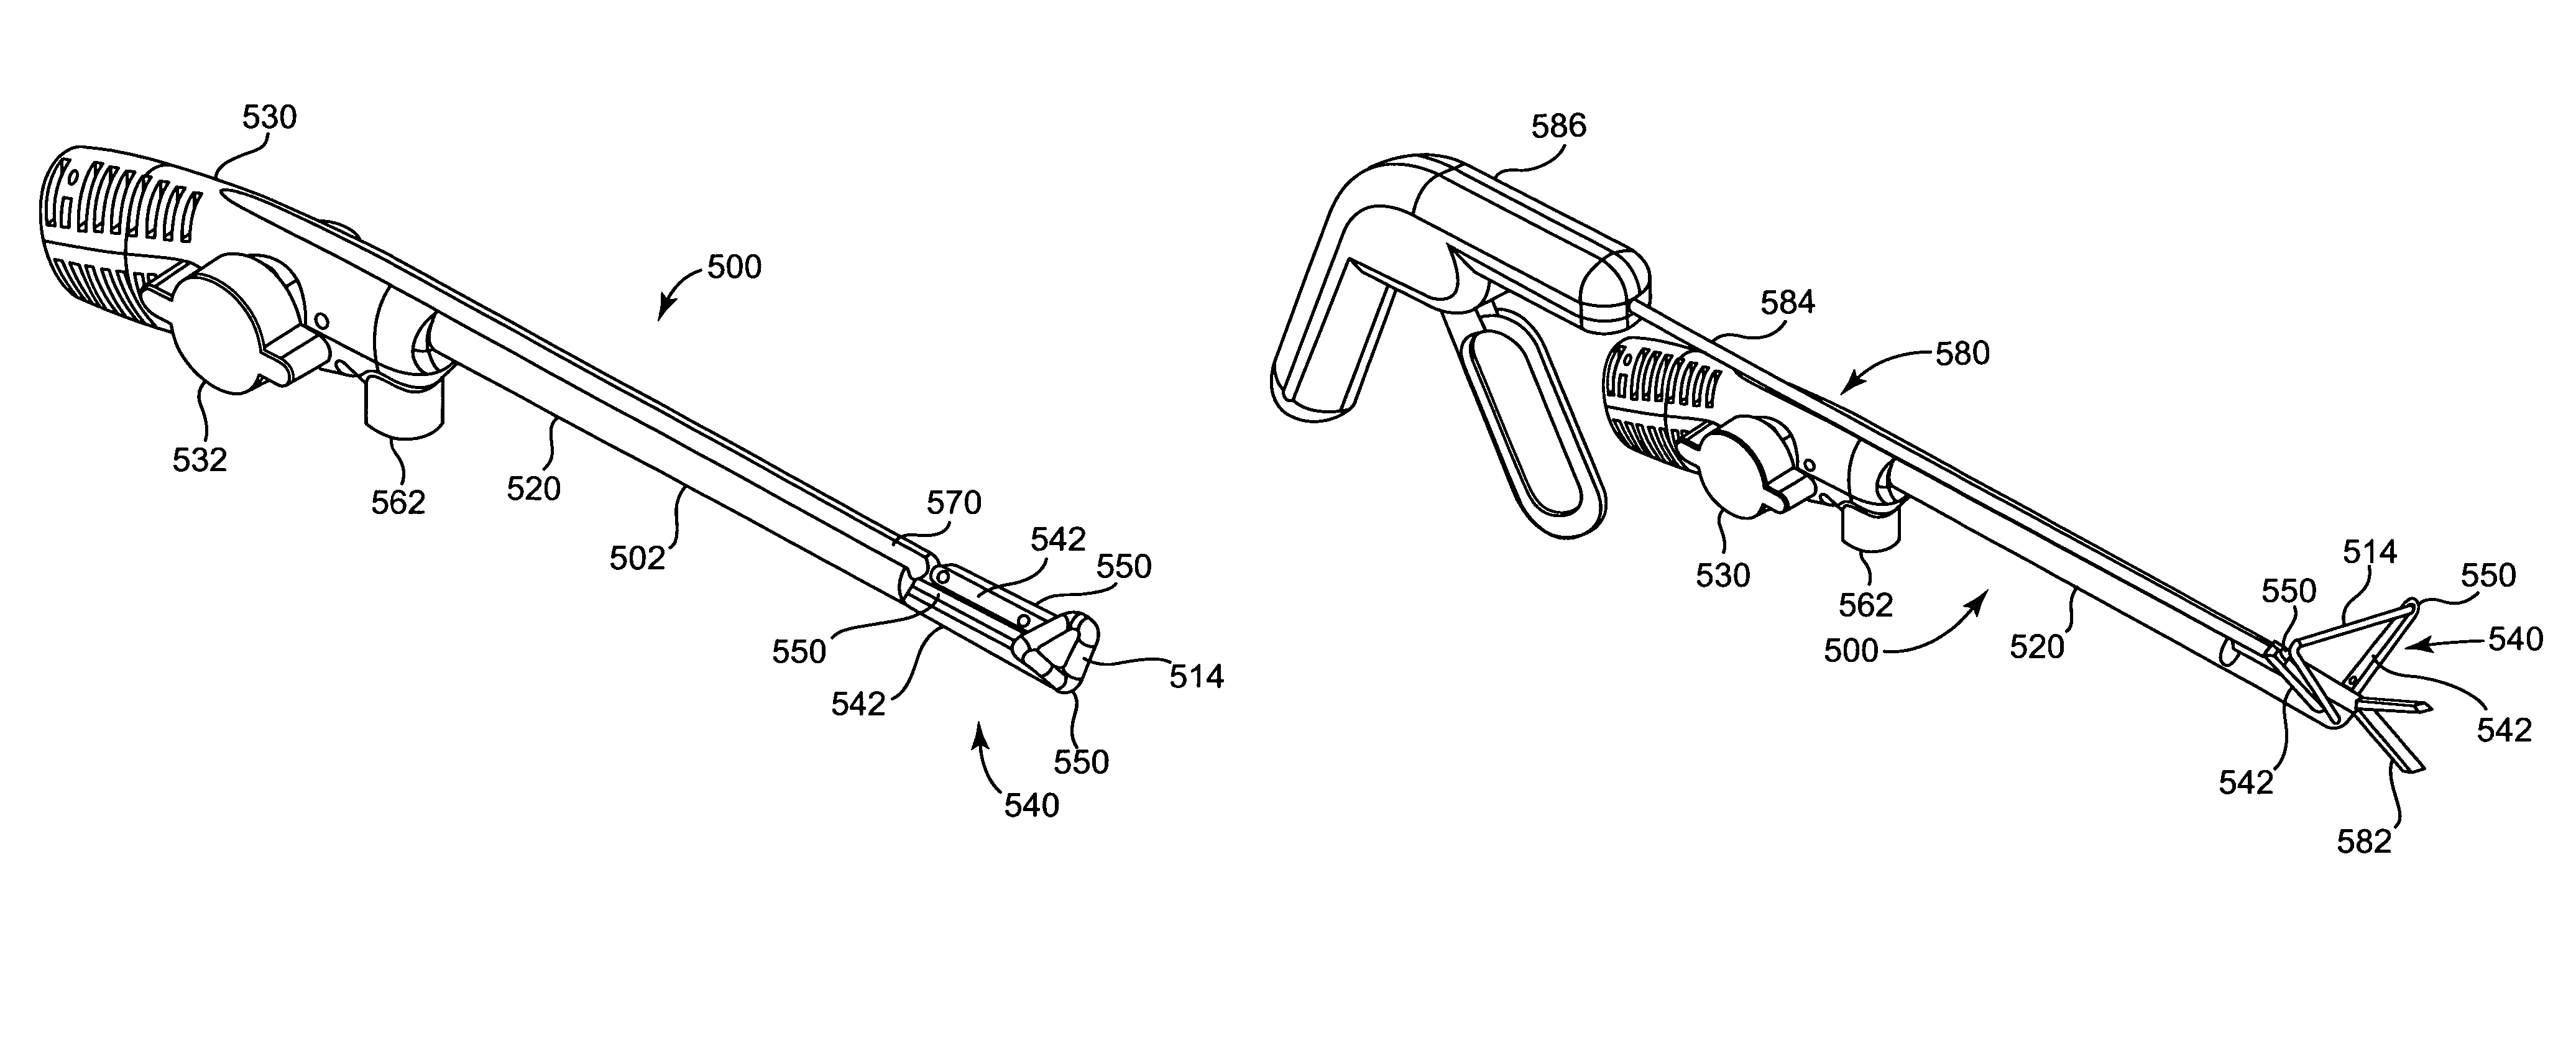 Device for occlusion of a left atrial appendage